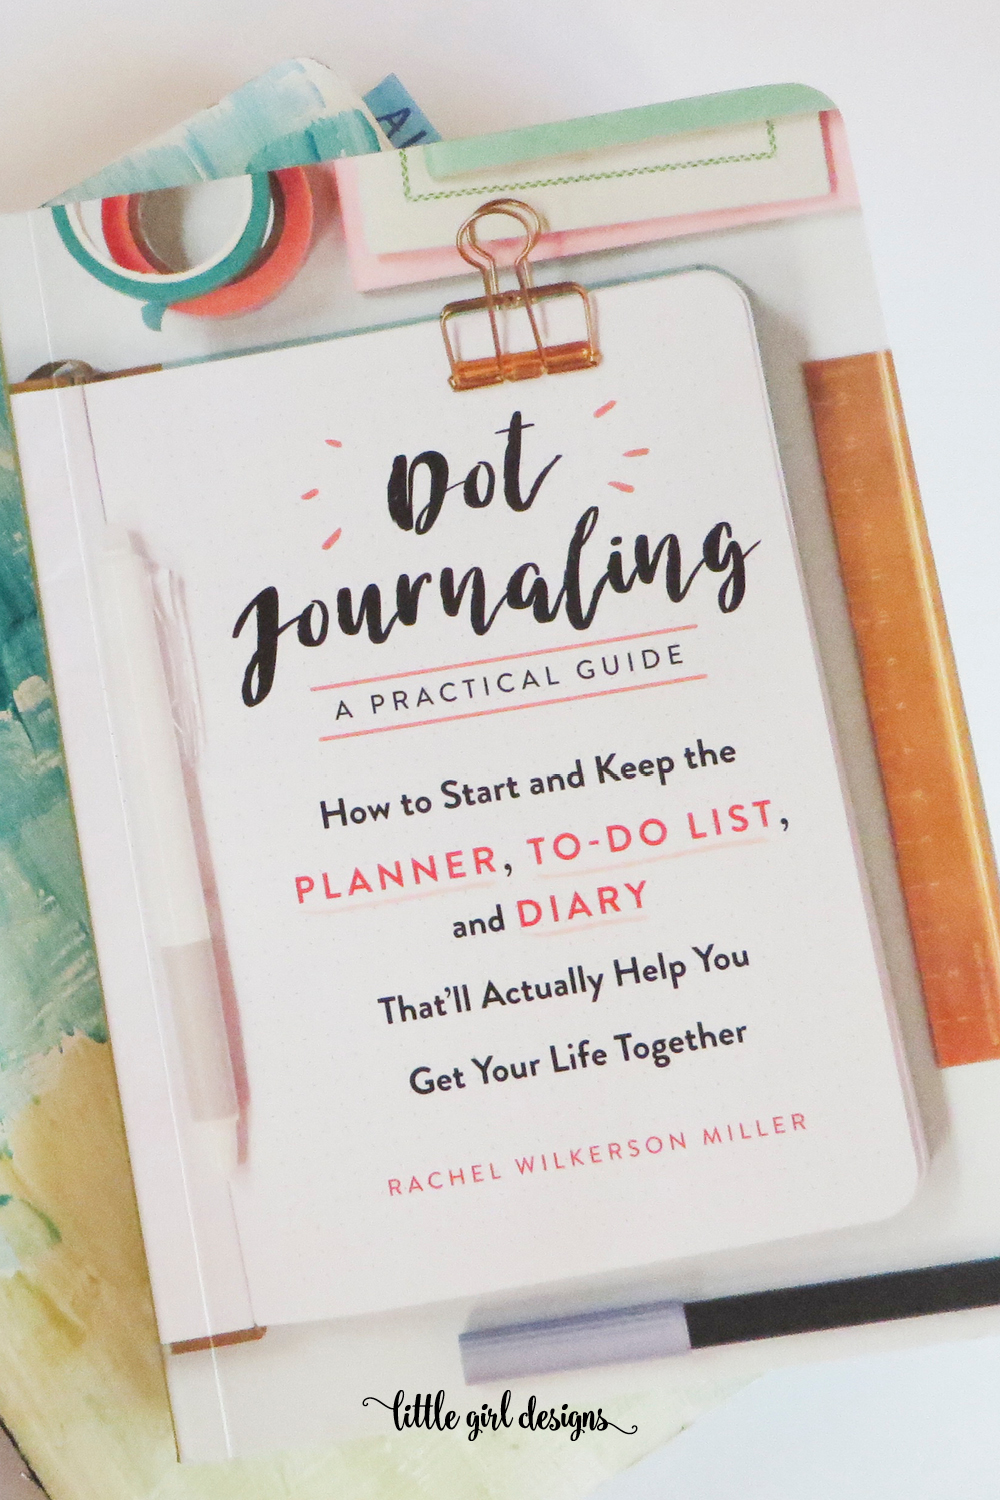 Want to learn how to dot journal? The concept behind a bullet journal is simple: it's your go-to place for your planner needs, to do list, and journal. But does it work? This author shares her method and so far, I've been loving the ideas I've learned!